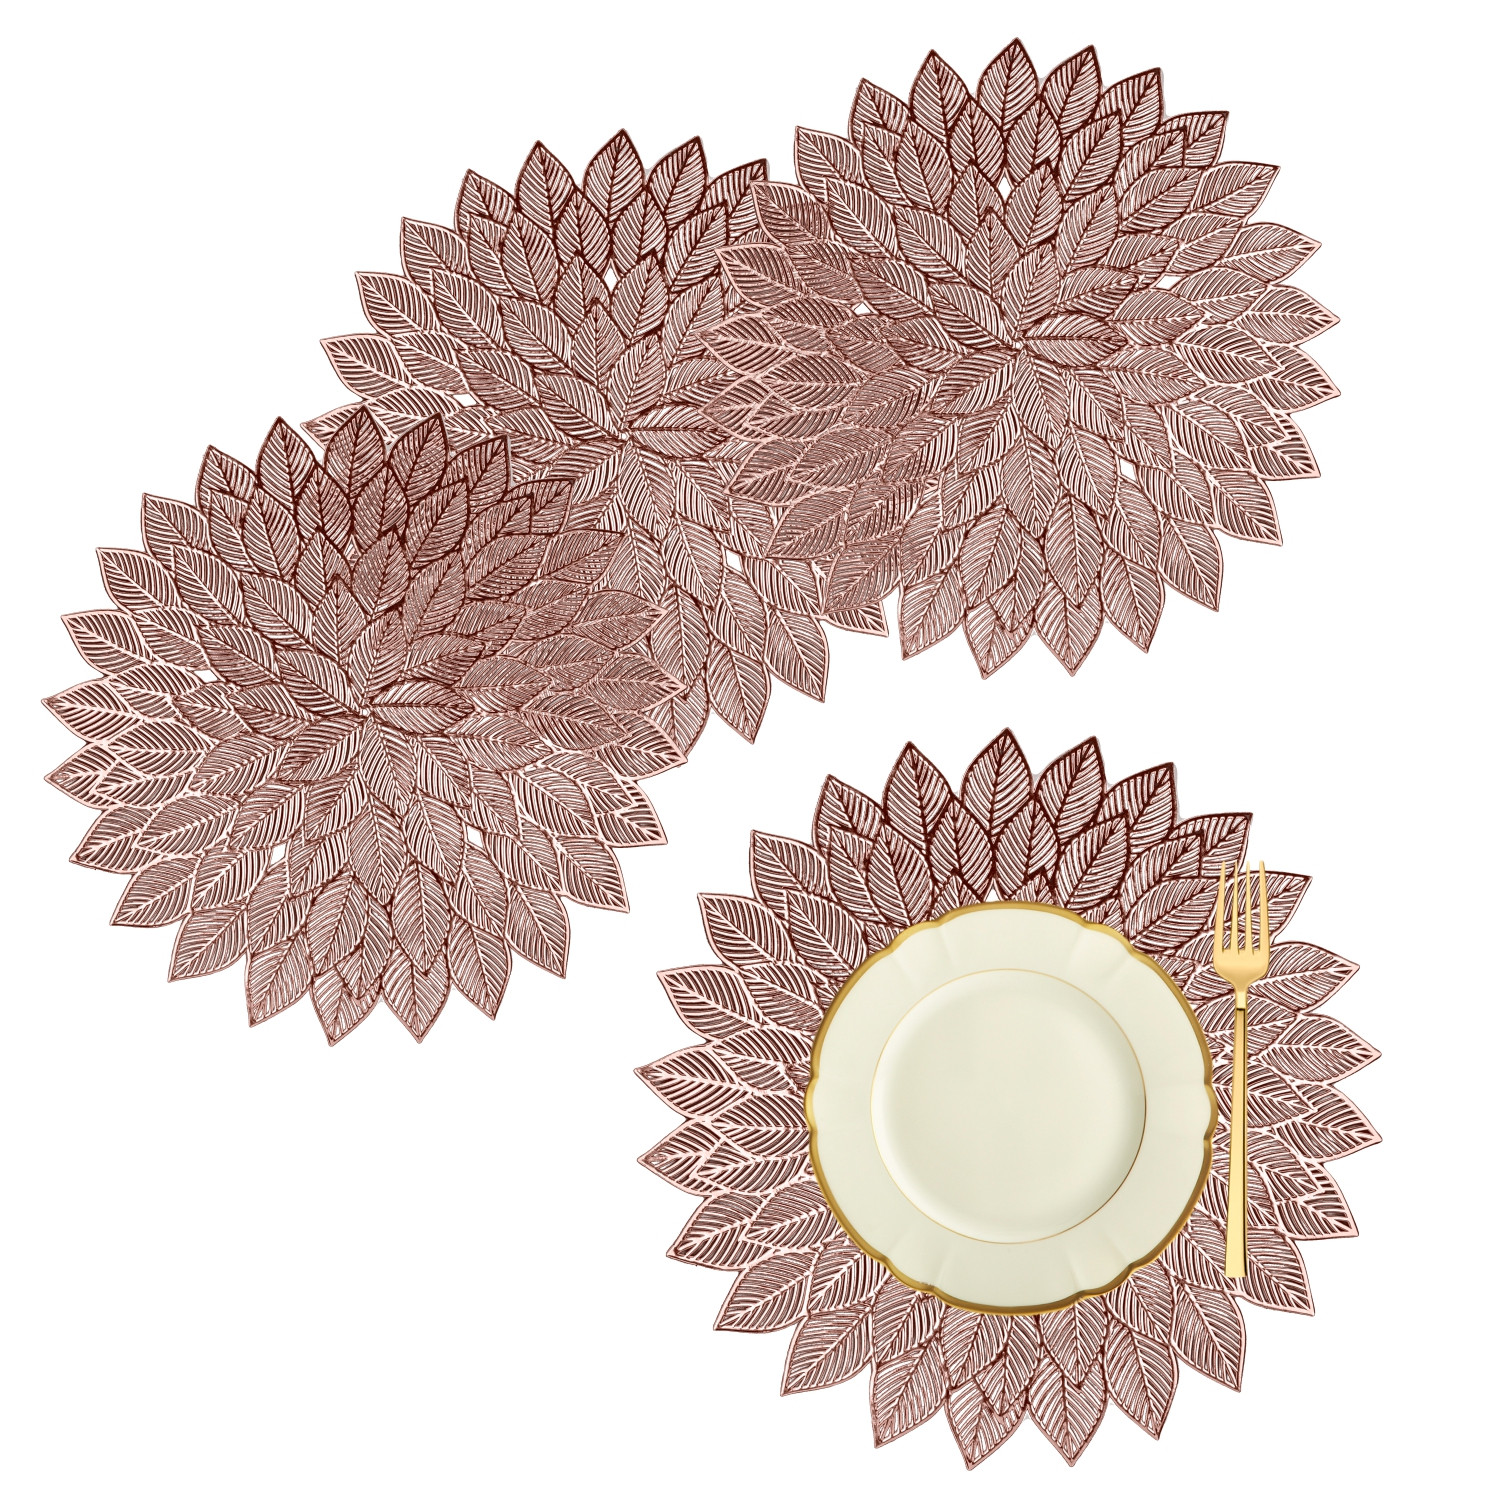 Kuber Industries Placemat | Placemats for Dining Room | Designer Table Mat Set | Placemats for Kitchen Table | Side Table Placemats | Round Flower Placemat |Copper